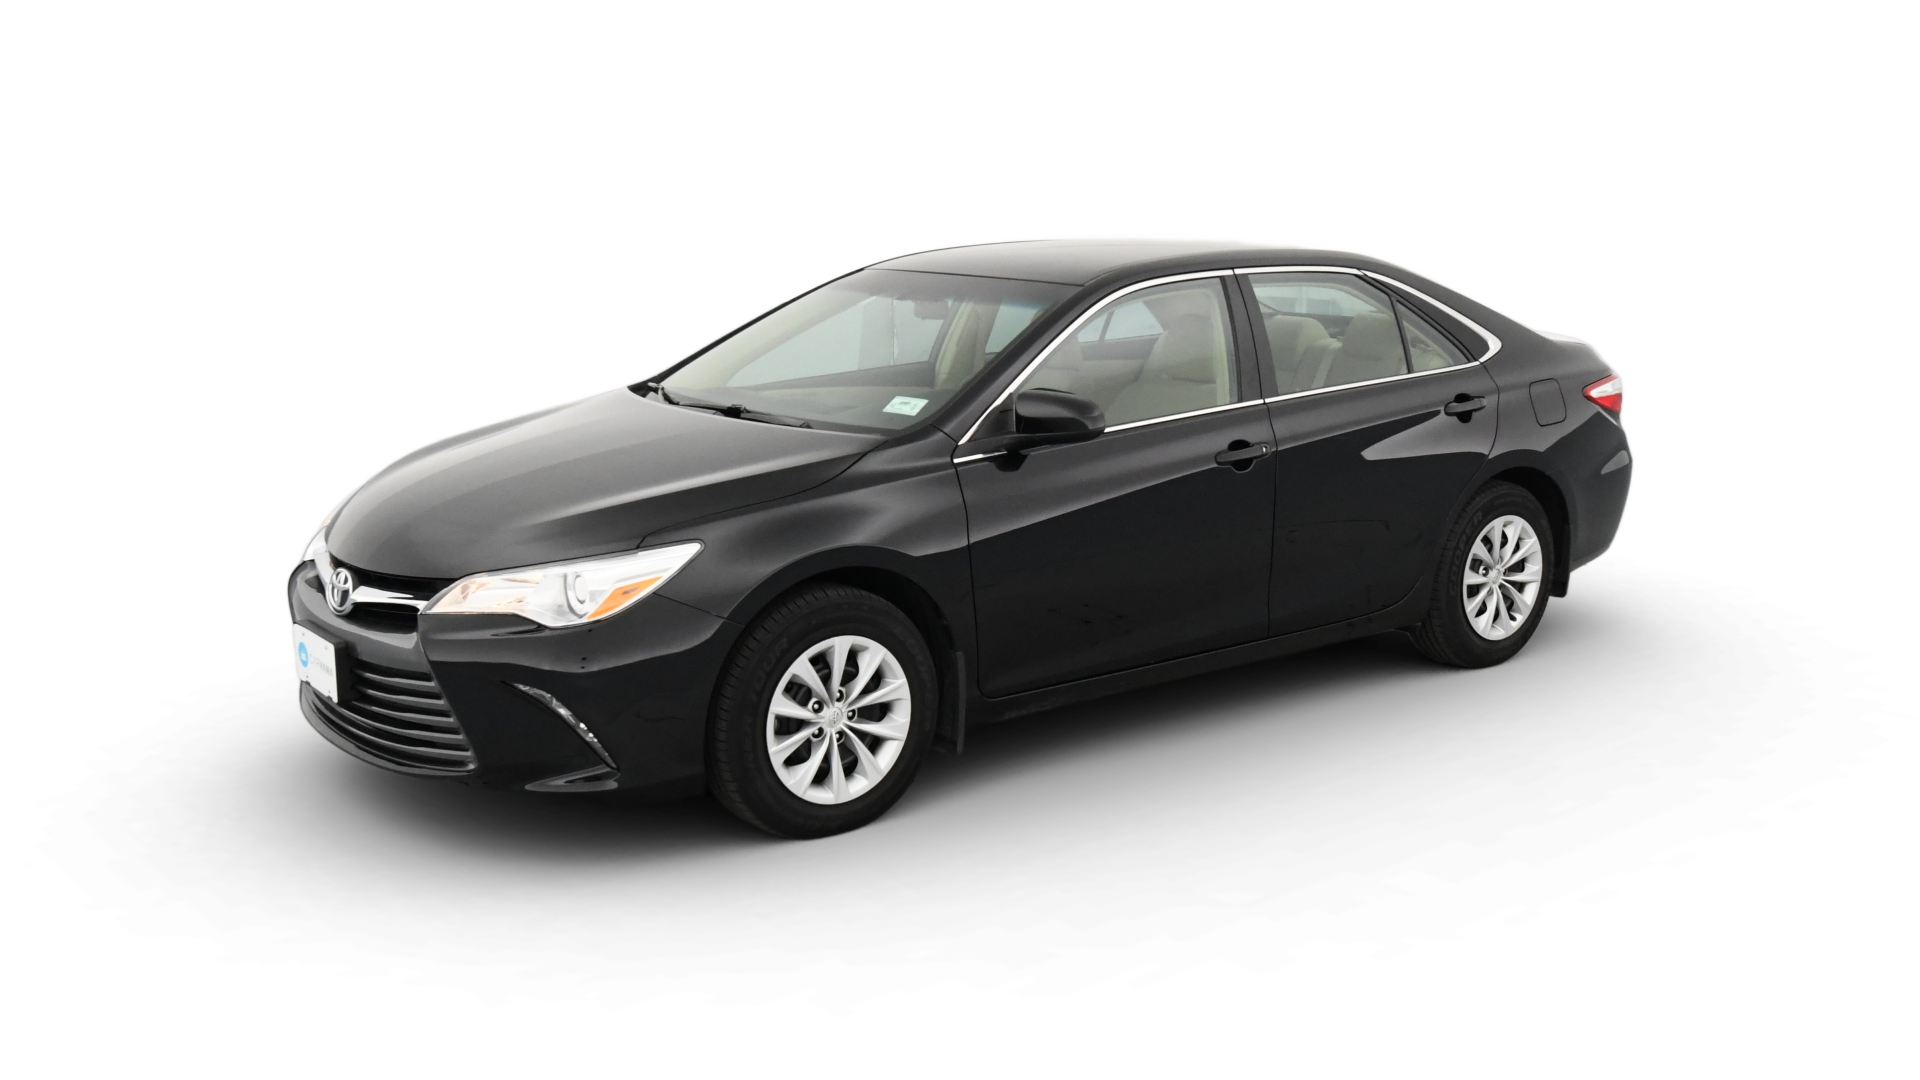 Used Toyota Camry For Sale Online | Carvana